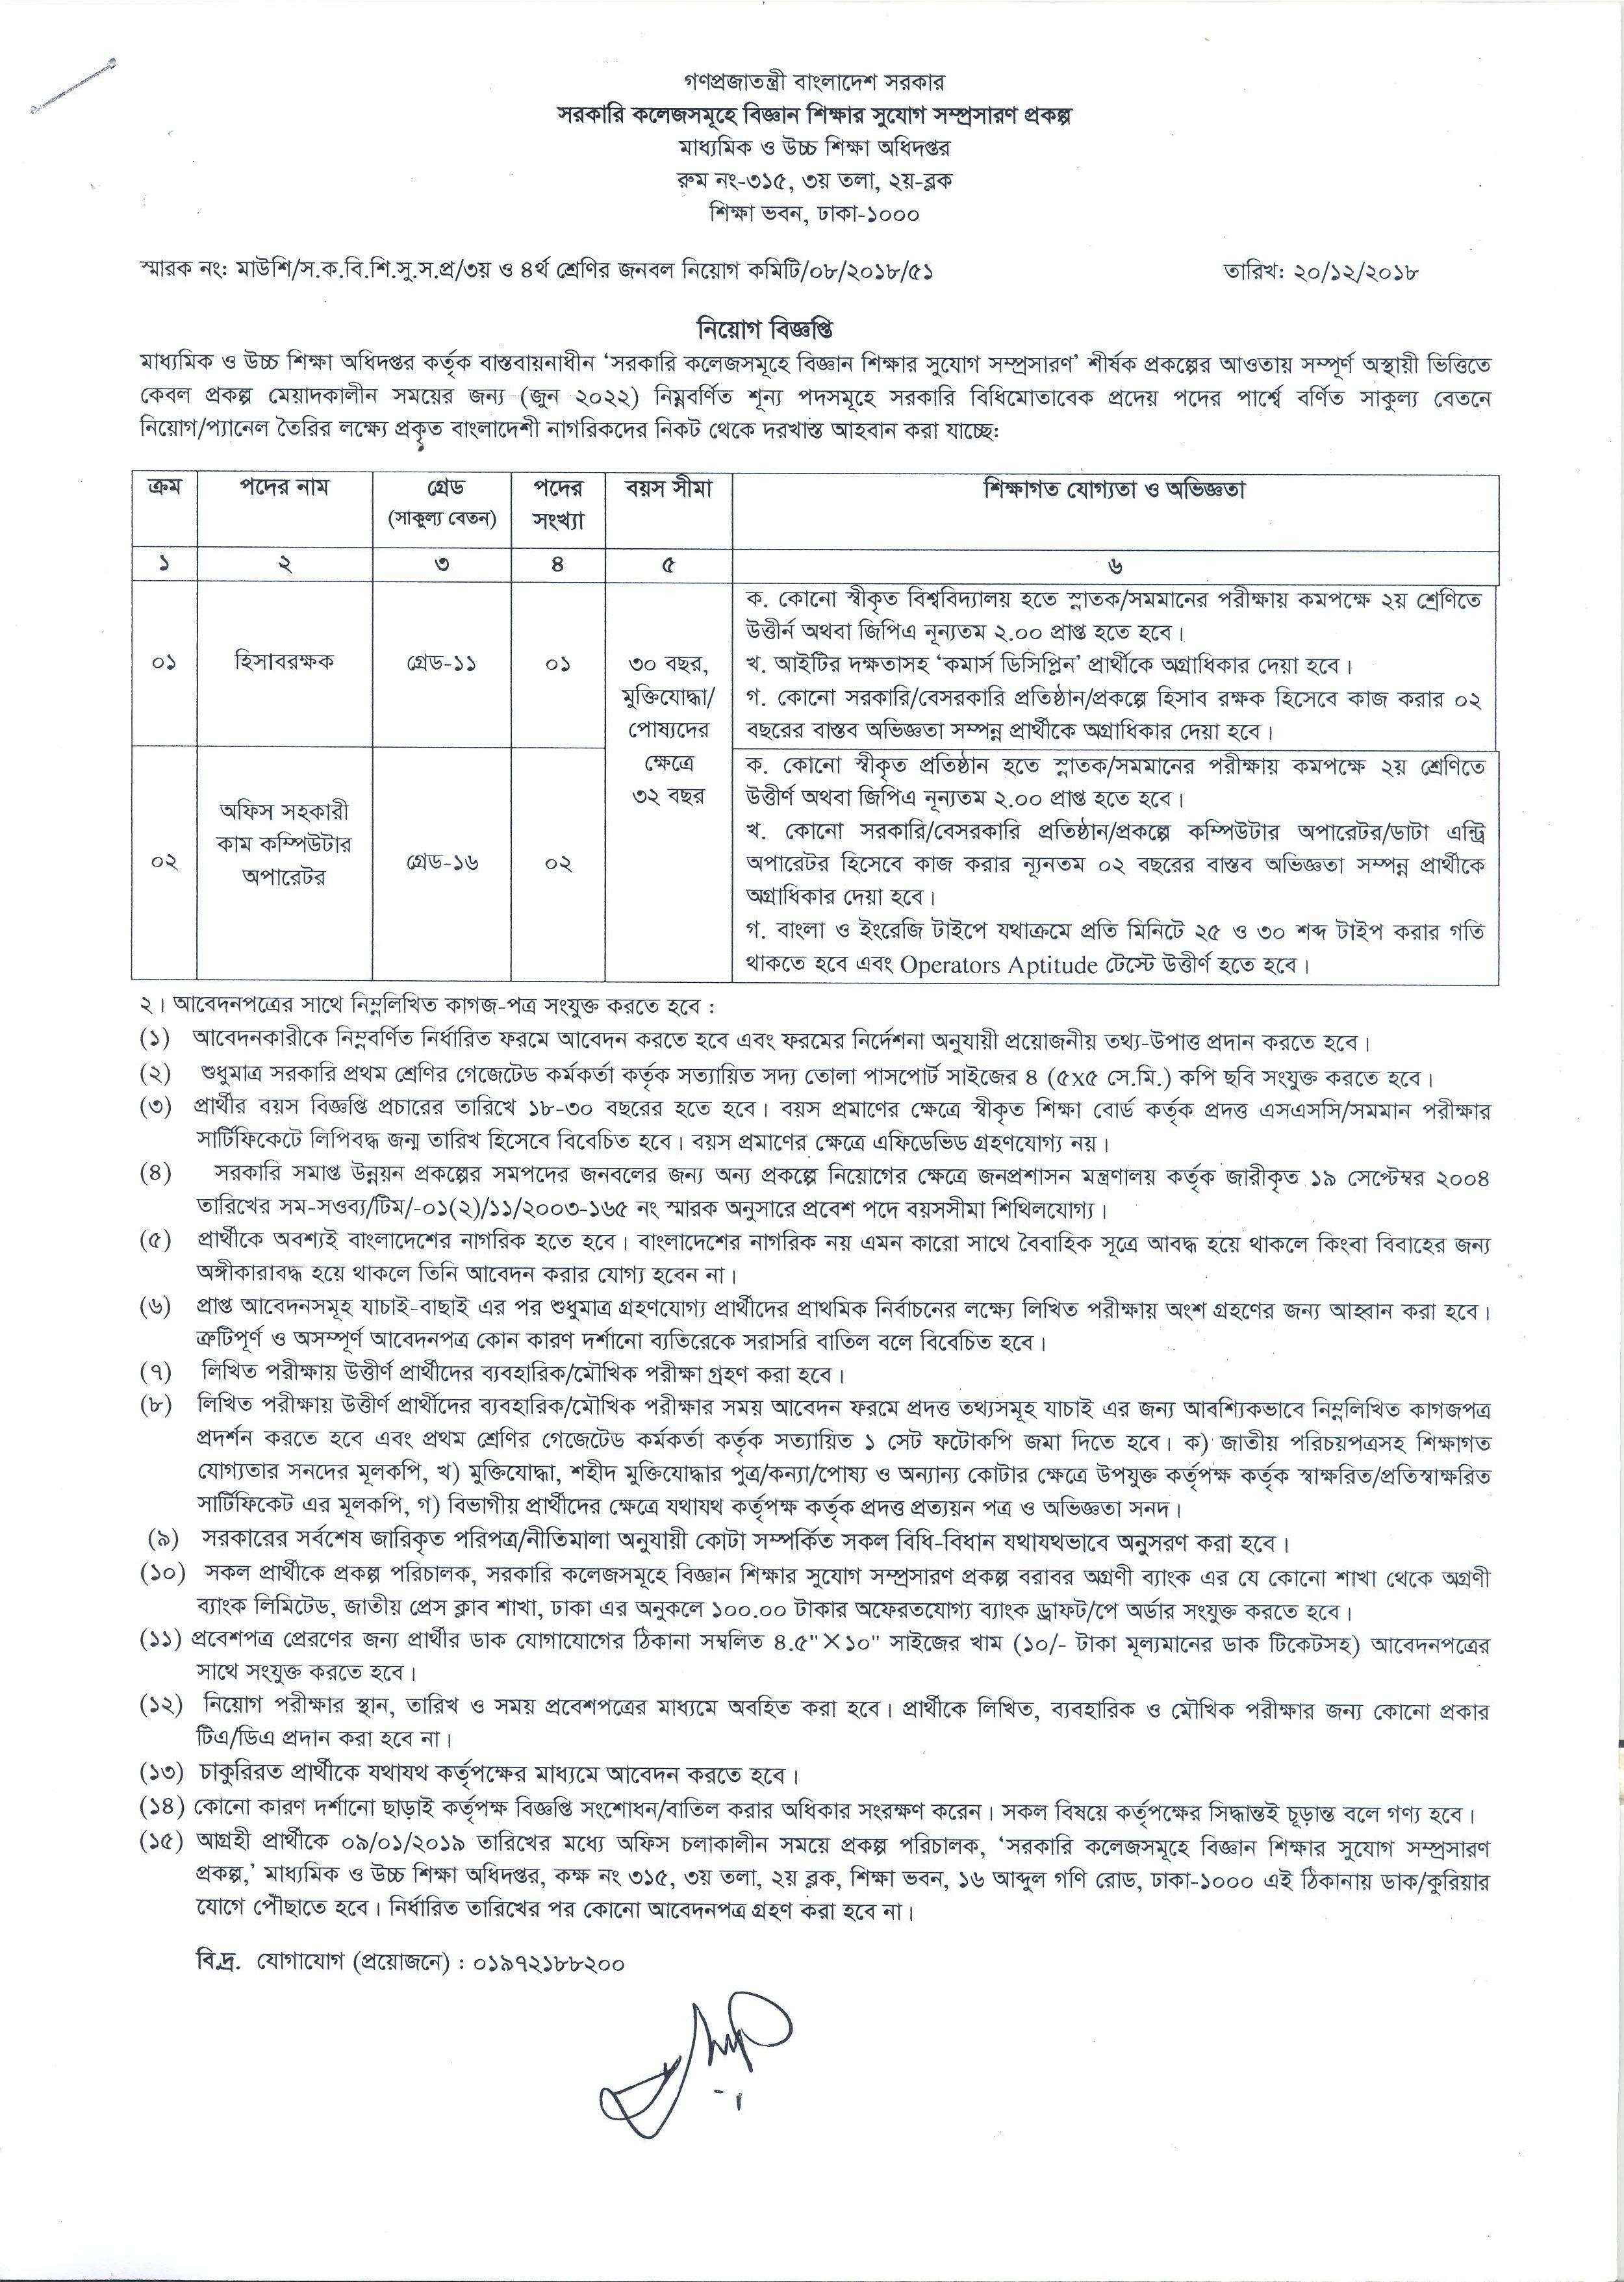 Directorate of Secondary and Higher Education (DSHE) Circular 2018, Directorate of secondary and higher education (DSHE) job circular, Directorate of Secondary and Higher Education (DSHE) Job Circular 2018, Directorate of Secondary and Higher Education Job Circular, Directorate of Secondary and Higher Education Job Circular 2018, DSHE Job Circular, DSHE Job Circular 2018, DSHE Job Circular And Application form, DSHE Job Circular And Application form 2018, DSHE Job Circular And Application form PDF, DSHE Job Circular Apply, DSHE Job Circular Apply form, DSHE New Job Circular, DSHE New Job Circular 2018 BD, DSHE.GOV.BD Circular 2018, DSHE.GOV.BD Job Circular 2018, http://www.dshe.gov.bd